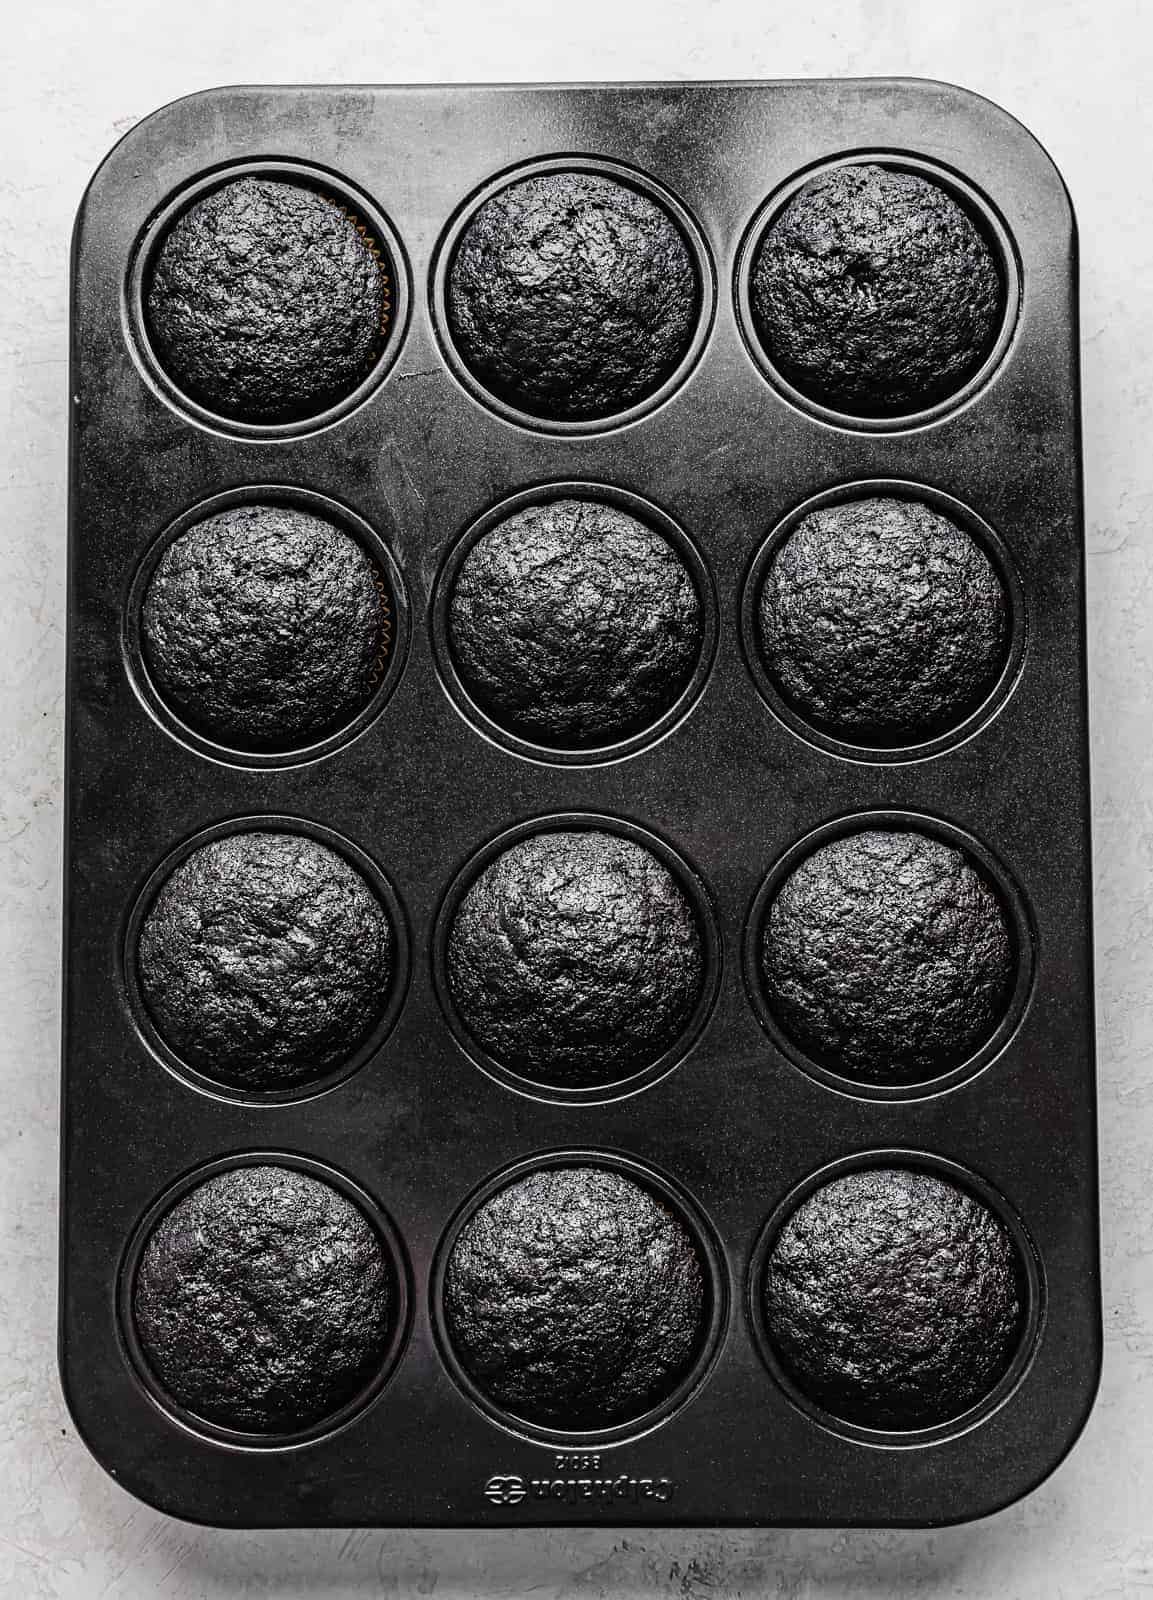 Baked Black Velvet Cupcakes in a 12 compartment cupcake pan.